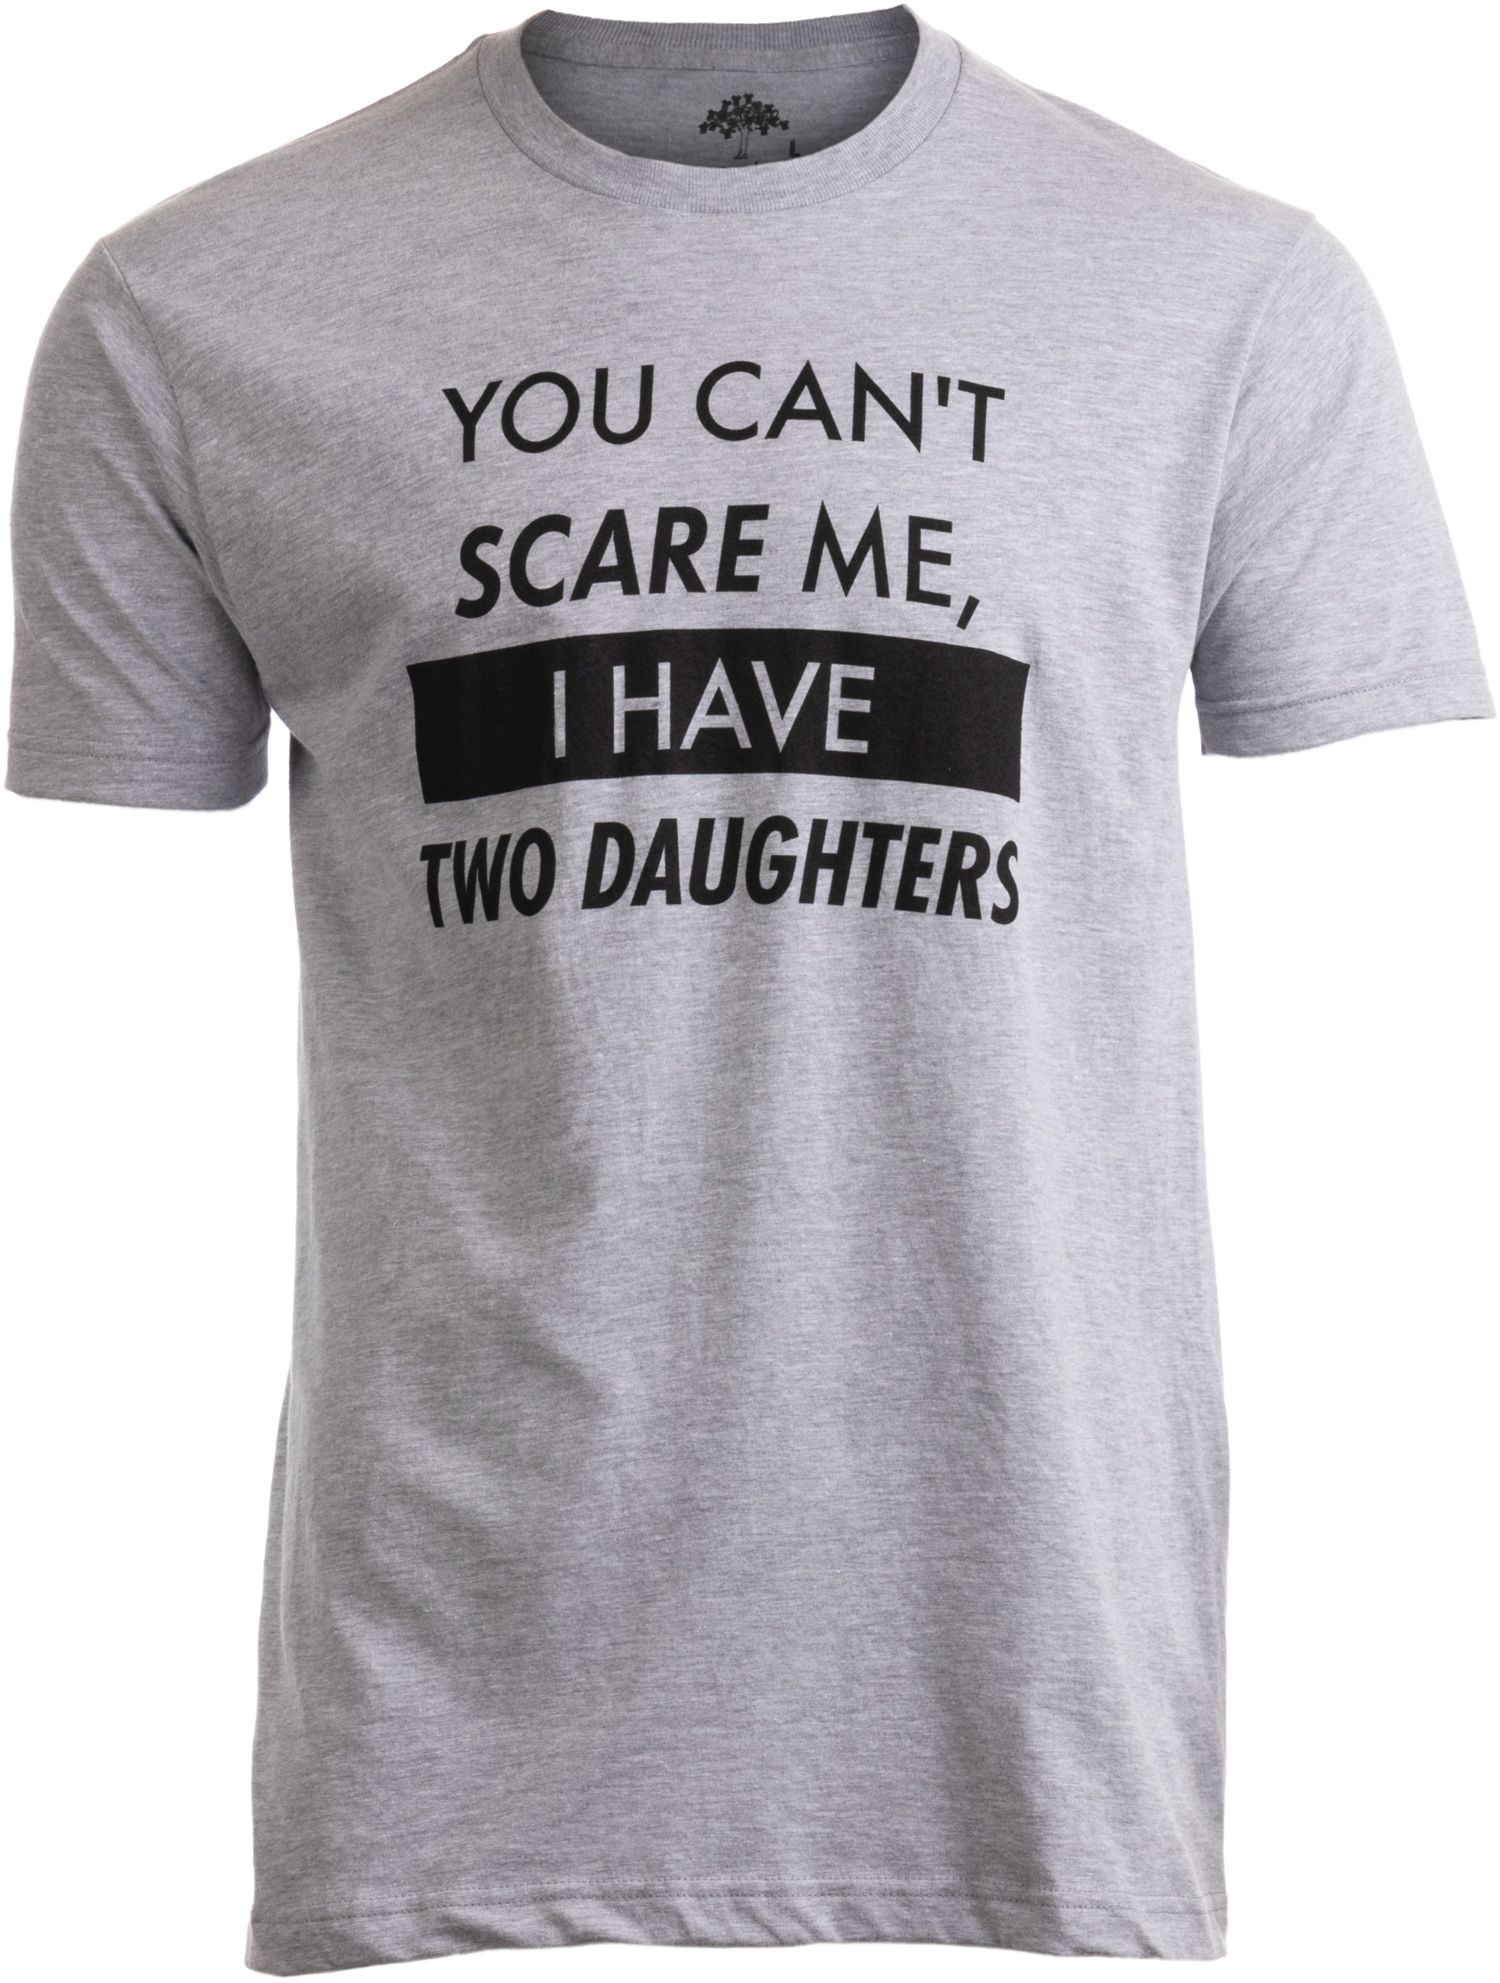 You Can't Scare Me, I Have Two Daughters - Funny Dad Joke, Father T-Shirt - image 1 of 6